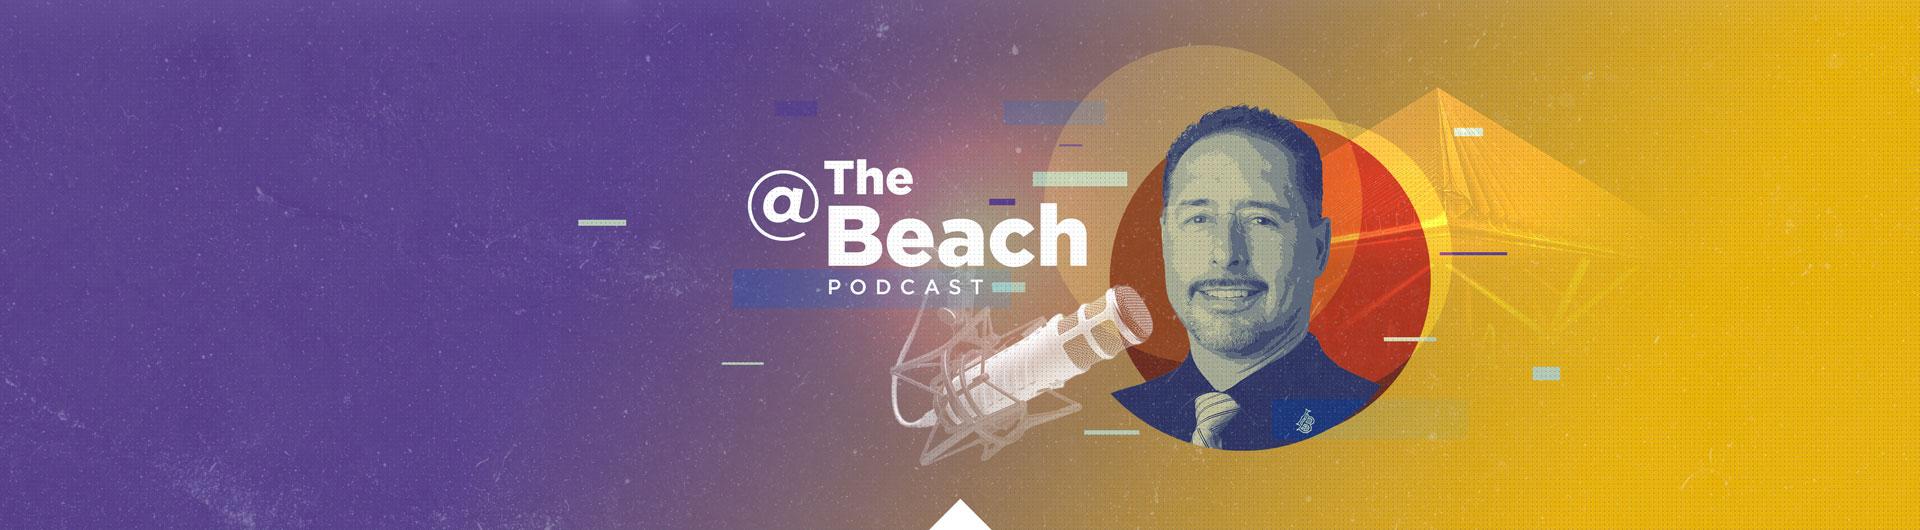 At The Beach Podcast